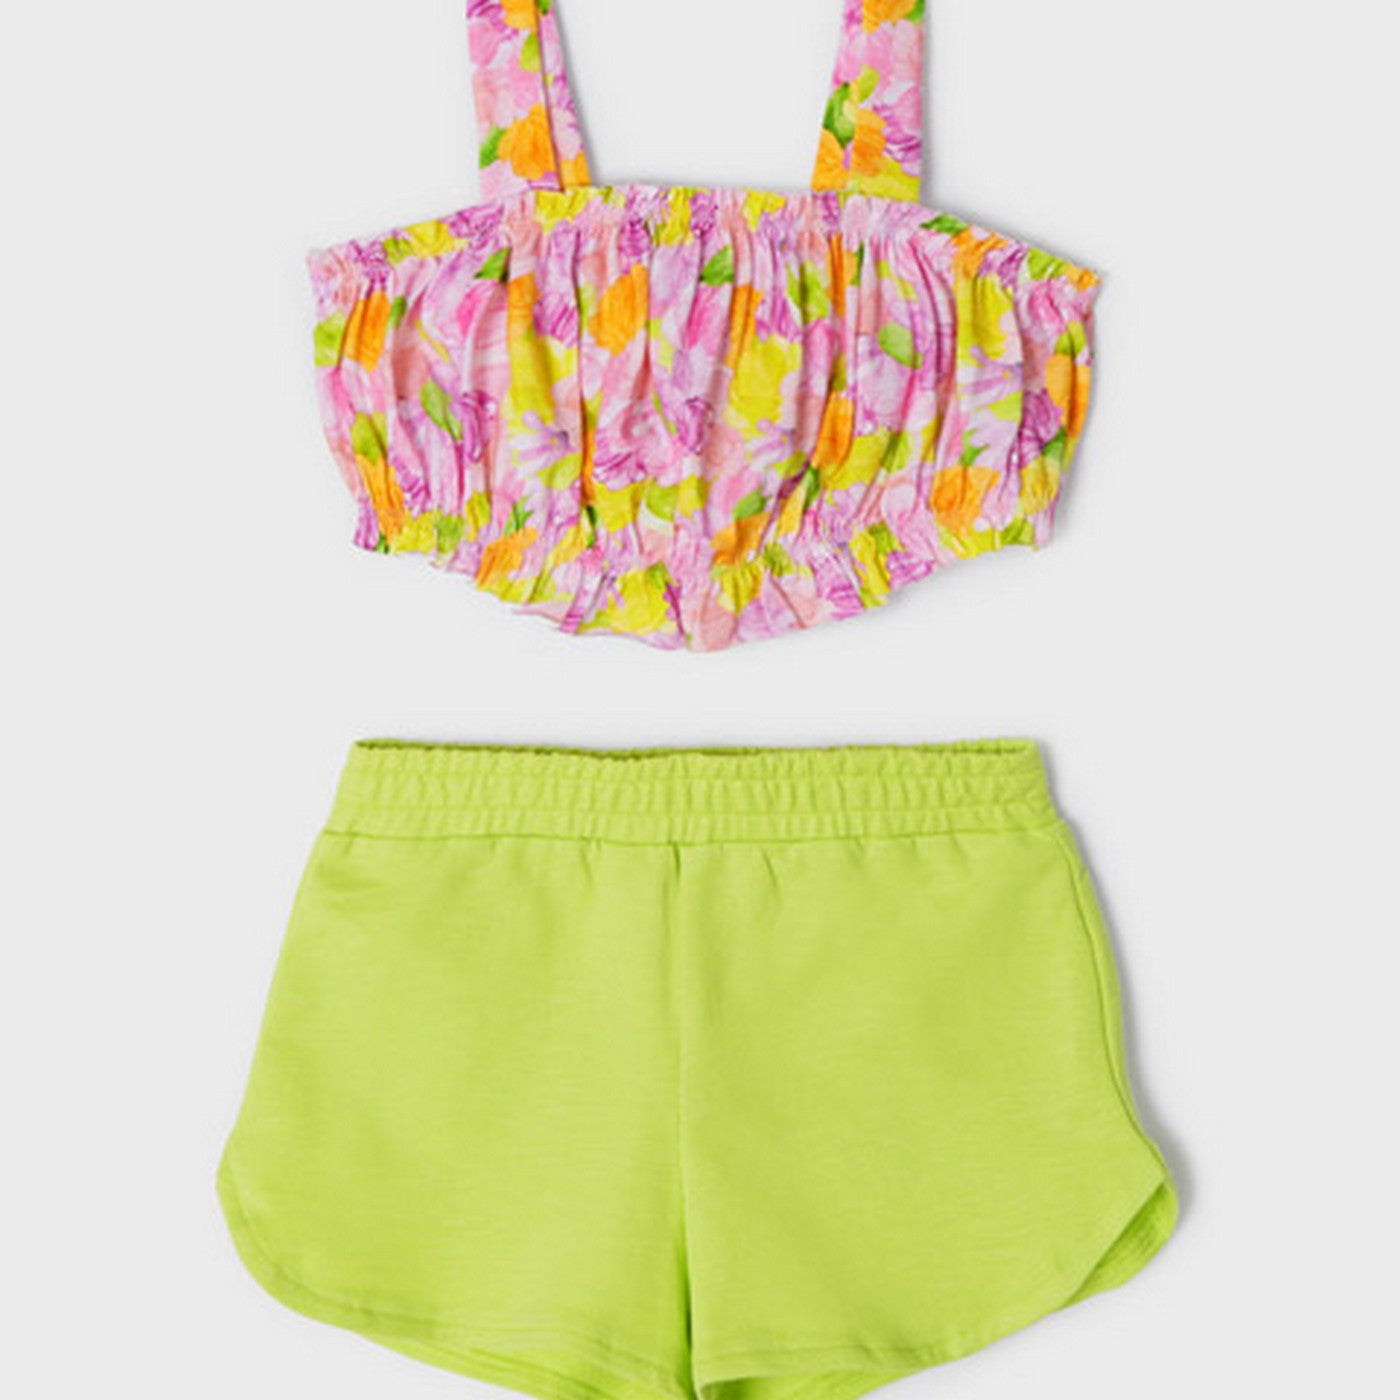 Completo Short e Top Fantasia Floreale In Cotone Neonata MAYORAL 3287 - MAYORAL - LuxuryKids